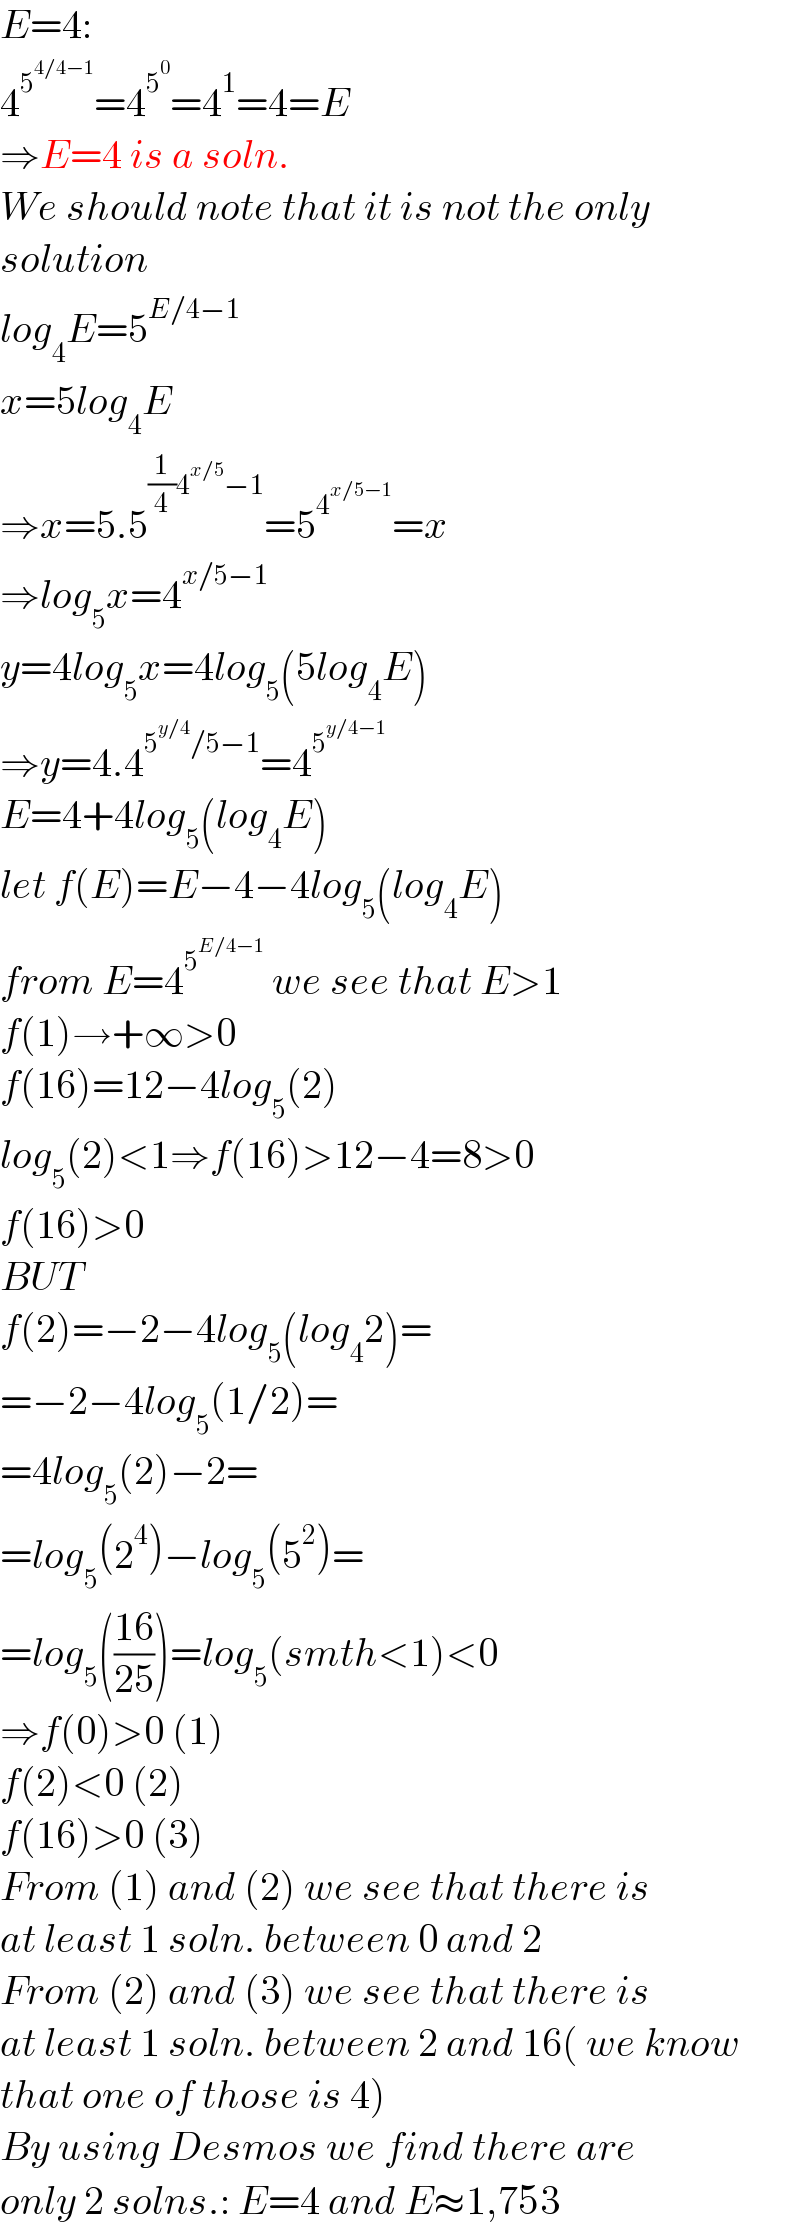 E=4:  4^5^(4/4−1)  =4^5^0  =4^1 =4=E  ⇒E=4 is a soln.  We should note that it is not the only  solution  log_4 E=5^(E/4−1)   x=5log_4 E  ⇒x=5.5^((1/4)4^(x/5) −1) =5^4^(x/5−1)  =x  ⇒log_5 x=4^(x/5−1)   y=4log_5 x=4log_5 (5log_4 E)  ⇒y=4.4^(5^(y/4) /5−1) =4^5^(y/4−1)    E=4+4log_5 (log_4 E)  let f(E)=E−4−4log_5 (log_4 E)  from E=4^5^(E/4−1)   we see that E>1  f(1)→+∞>0  f(16)=12−4log_5 (2)  log_5 (2)<1⇒f(16)>12−4=8>0  f(16)>0  BUT  f(2)=−2−4log_5 (log_4 2)=  =−2−4log_5 (1/2)=  =4log_5 (2)−2=  =log_5 (2^4 )−log_5 (5^2 )=  =log_5 (((16)/(25)))=log_5 (smth<1)<0  ⇒f(0)>0 (1)  f(2)<0 (2)  f(16)>0 (3)  From (1) and (2) we see that there is  at least 1 soln. between 0 and 2  From (2) and (3) we see that there is  at least 1 soln. between 2 and 16( we know  that one of those is 4)  By using Desmos we find there are  only 2 solns.: E=4 and E≈1,753  